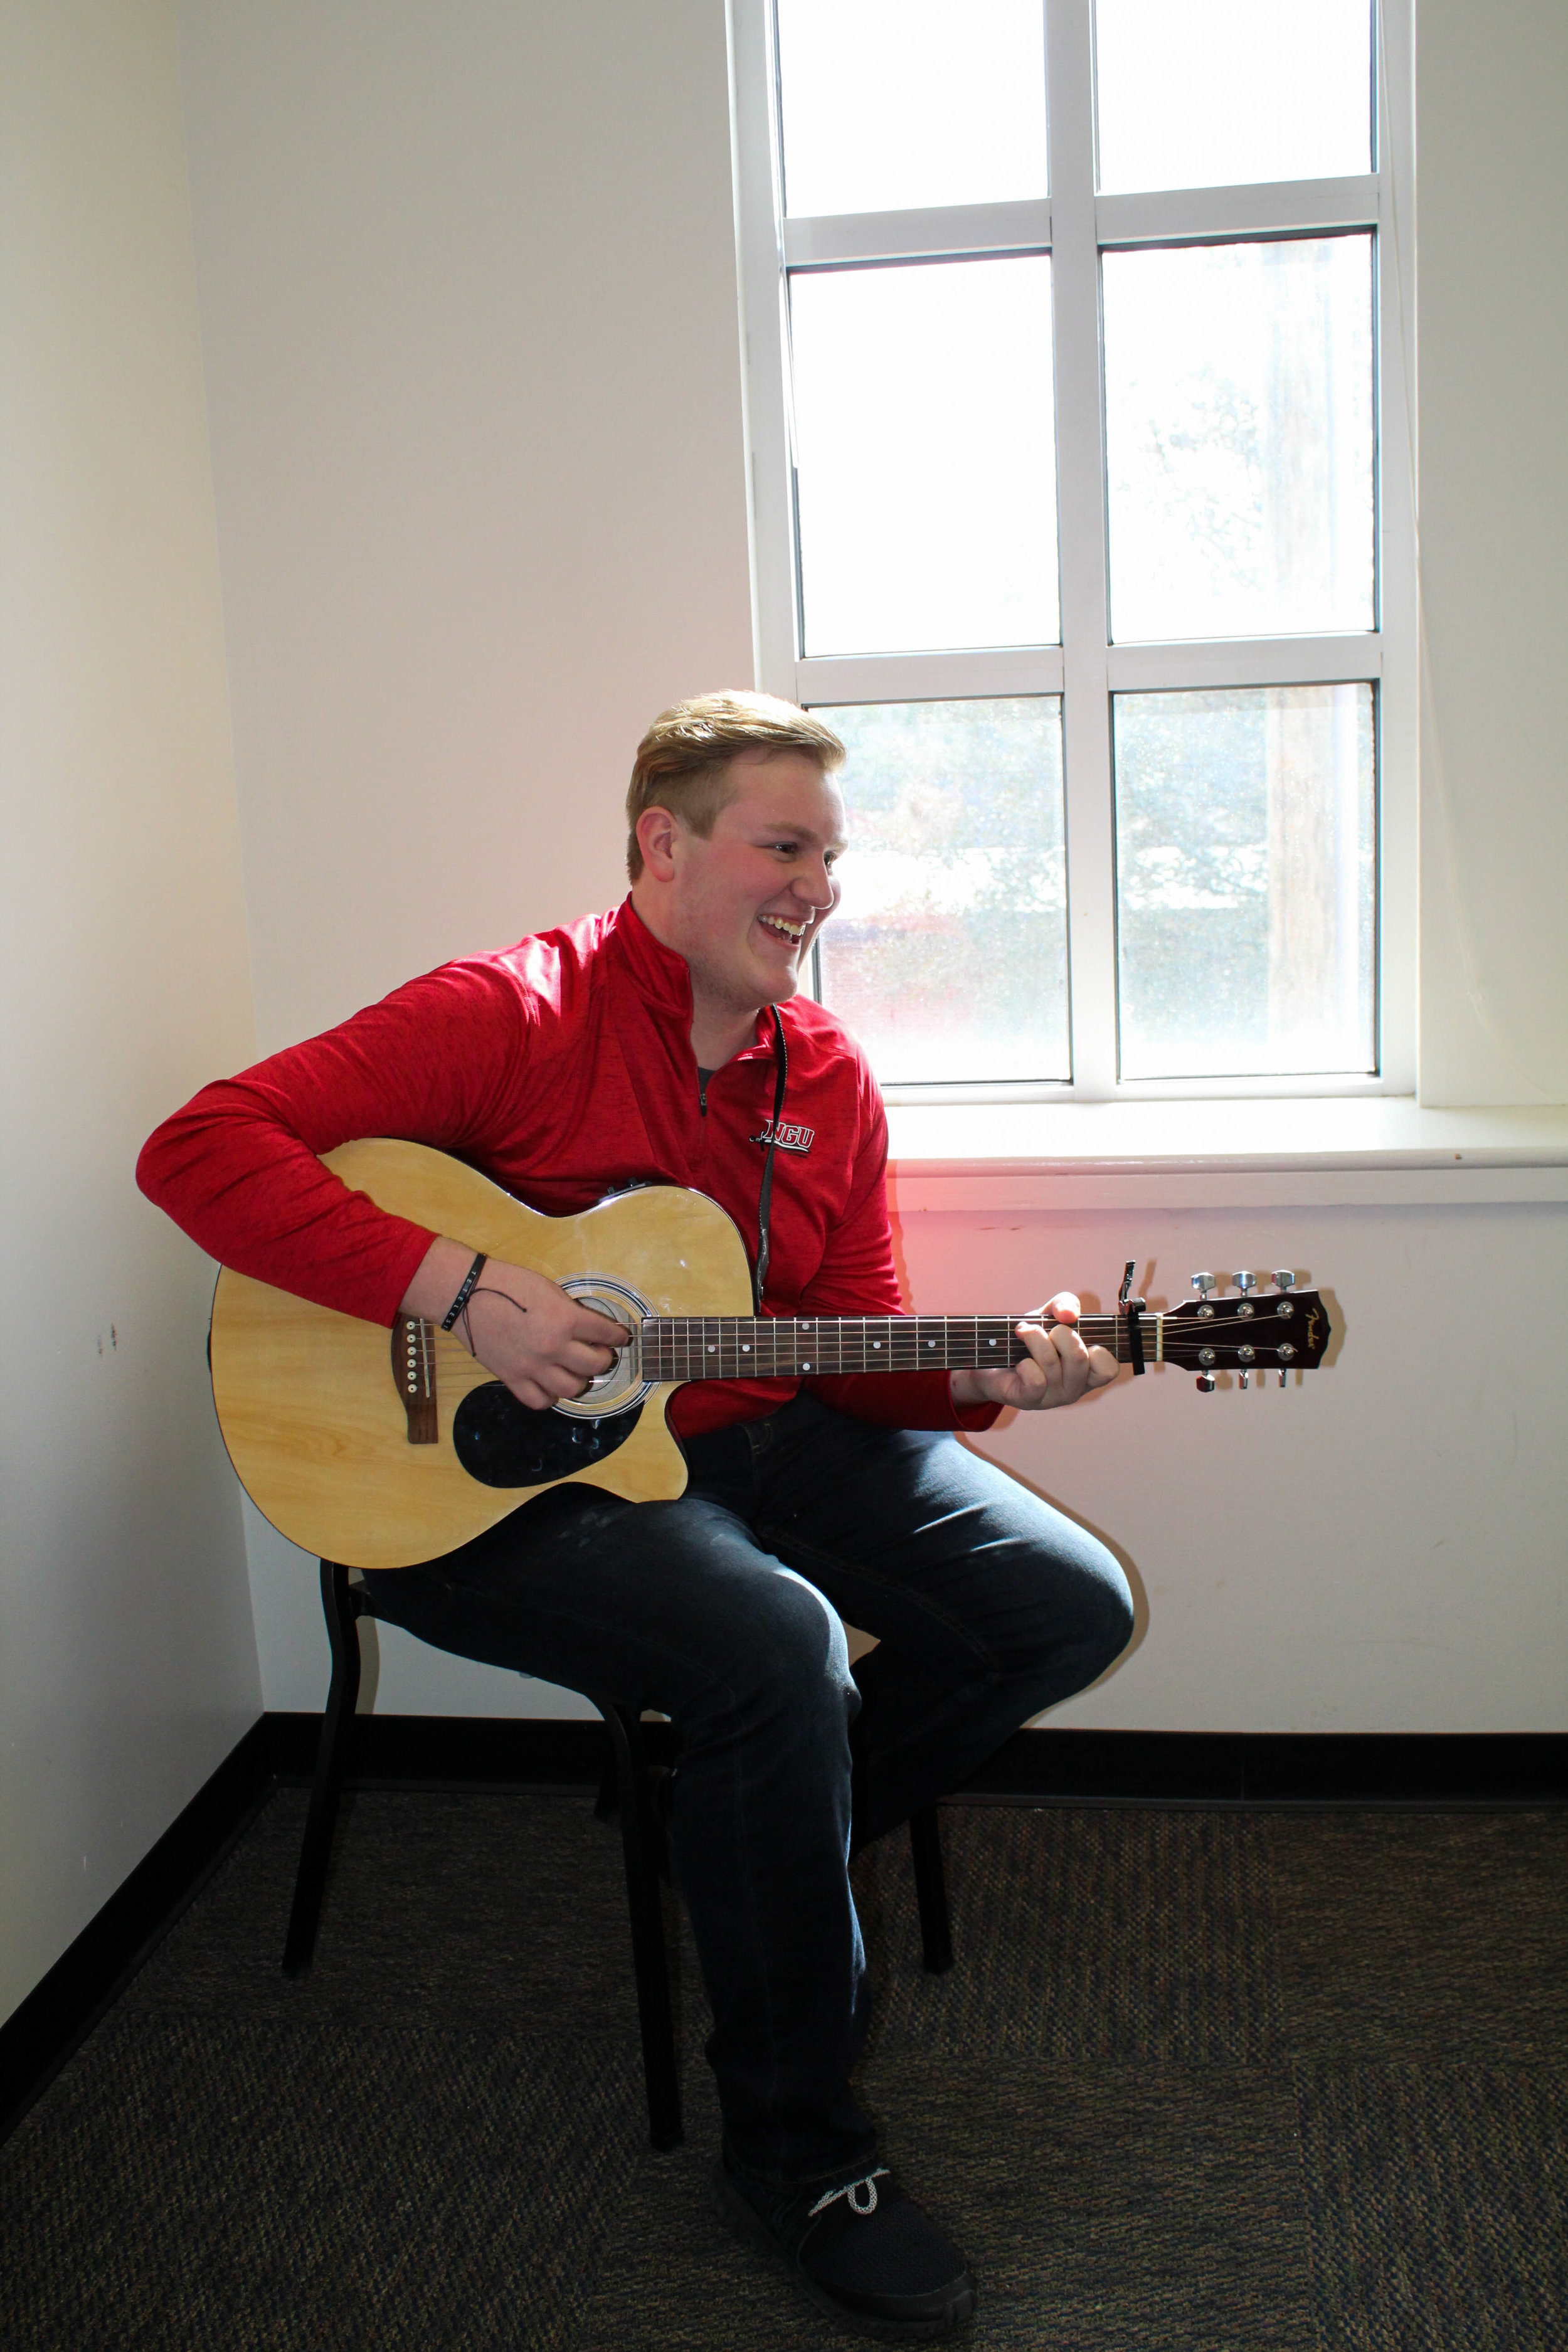 Nicolas Olson, a freshman double major in business administration and Christian studies, practices his guitar as he wears red for the awareness of heart disease.